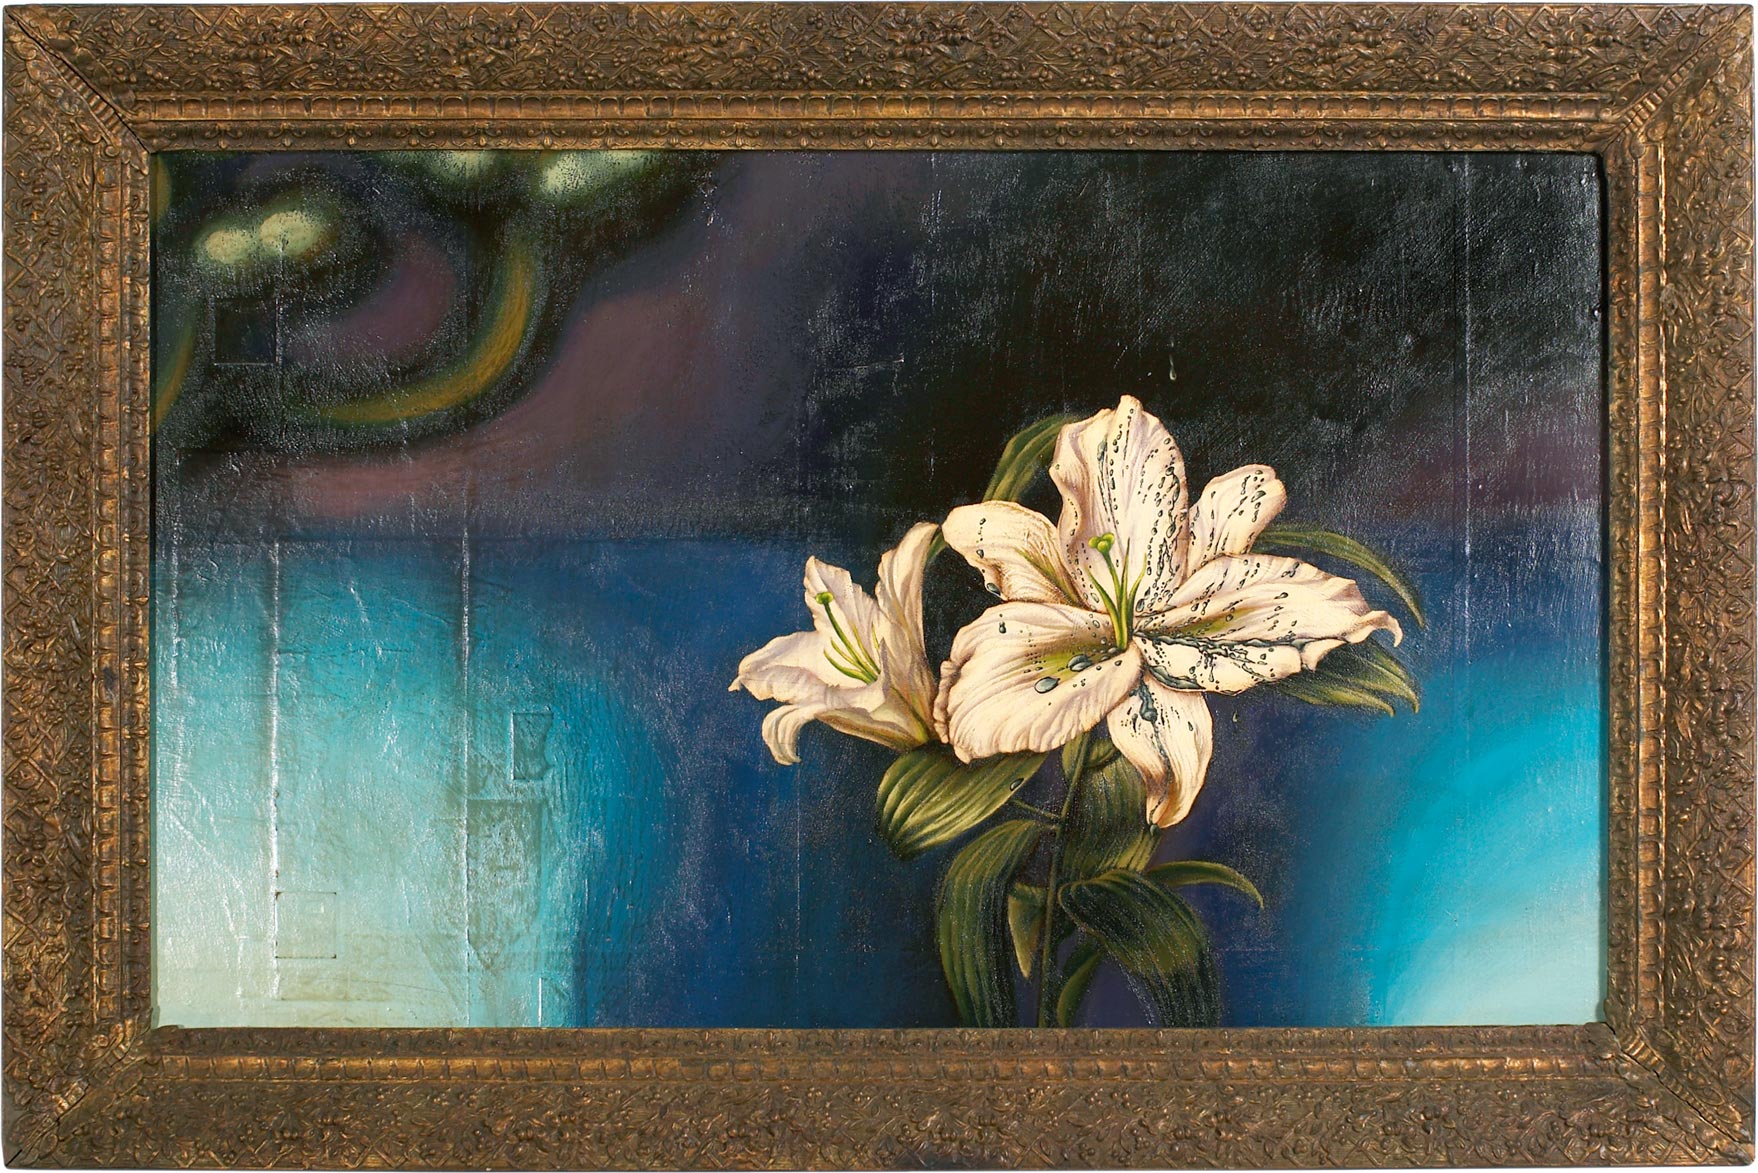    Black Lily Sunday   Mixed Media Painting 42in x 28in 